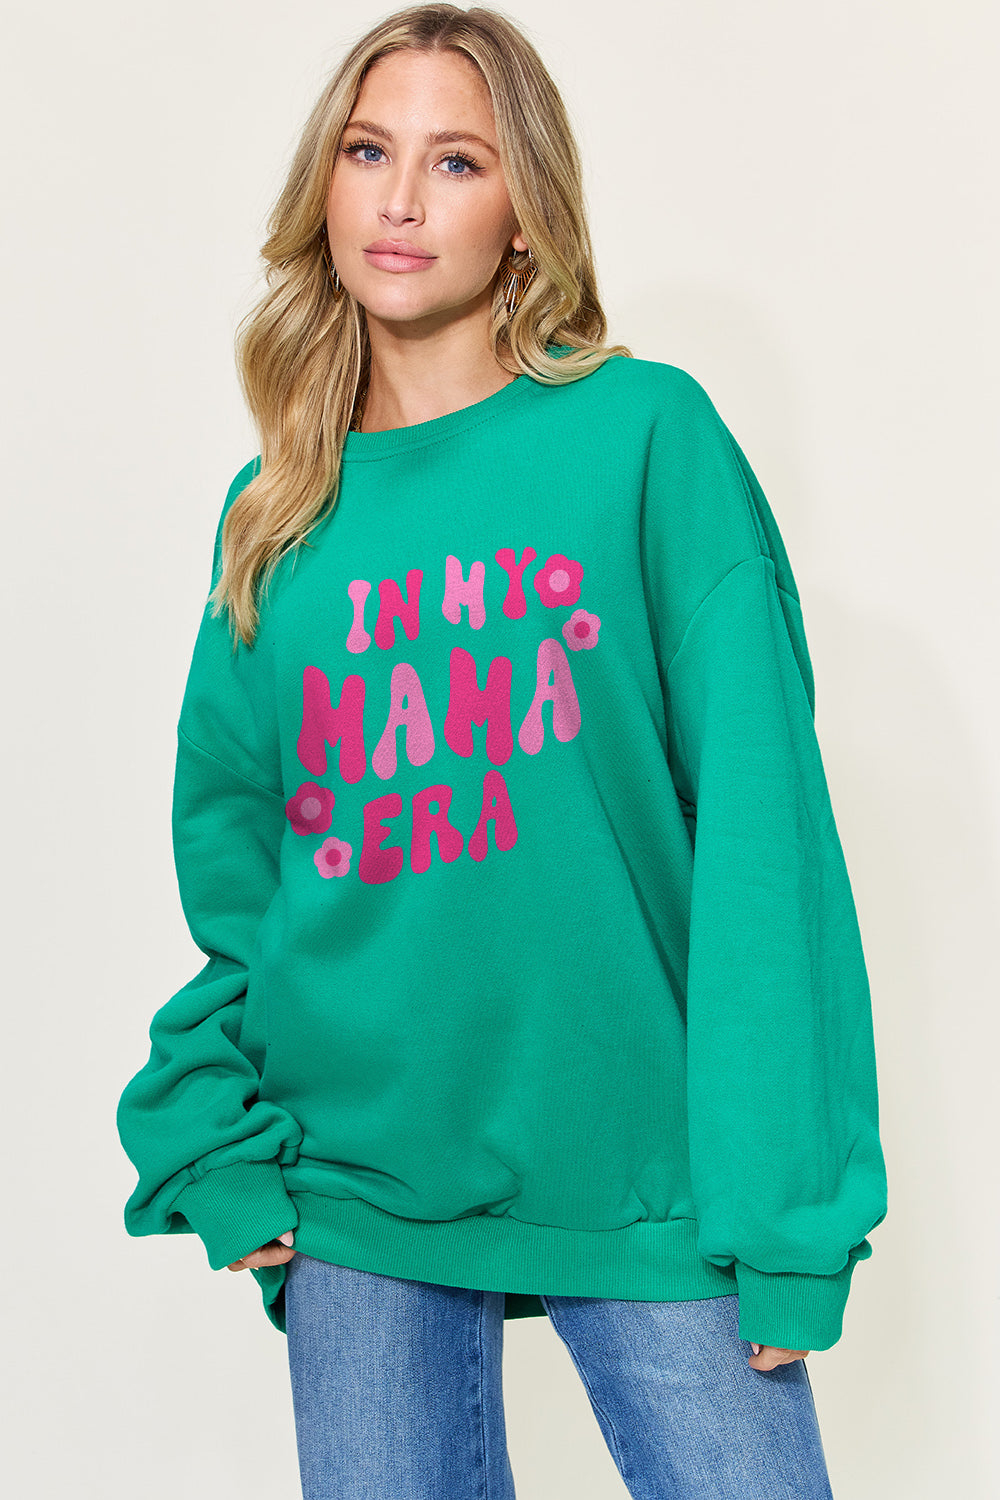 PREORDER- Simply Love Full Size Letter Graphic Long Sleeve Sweatshirt